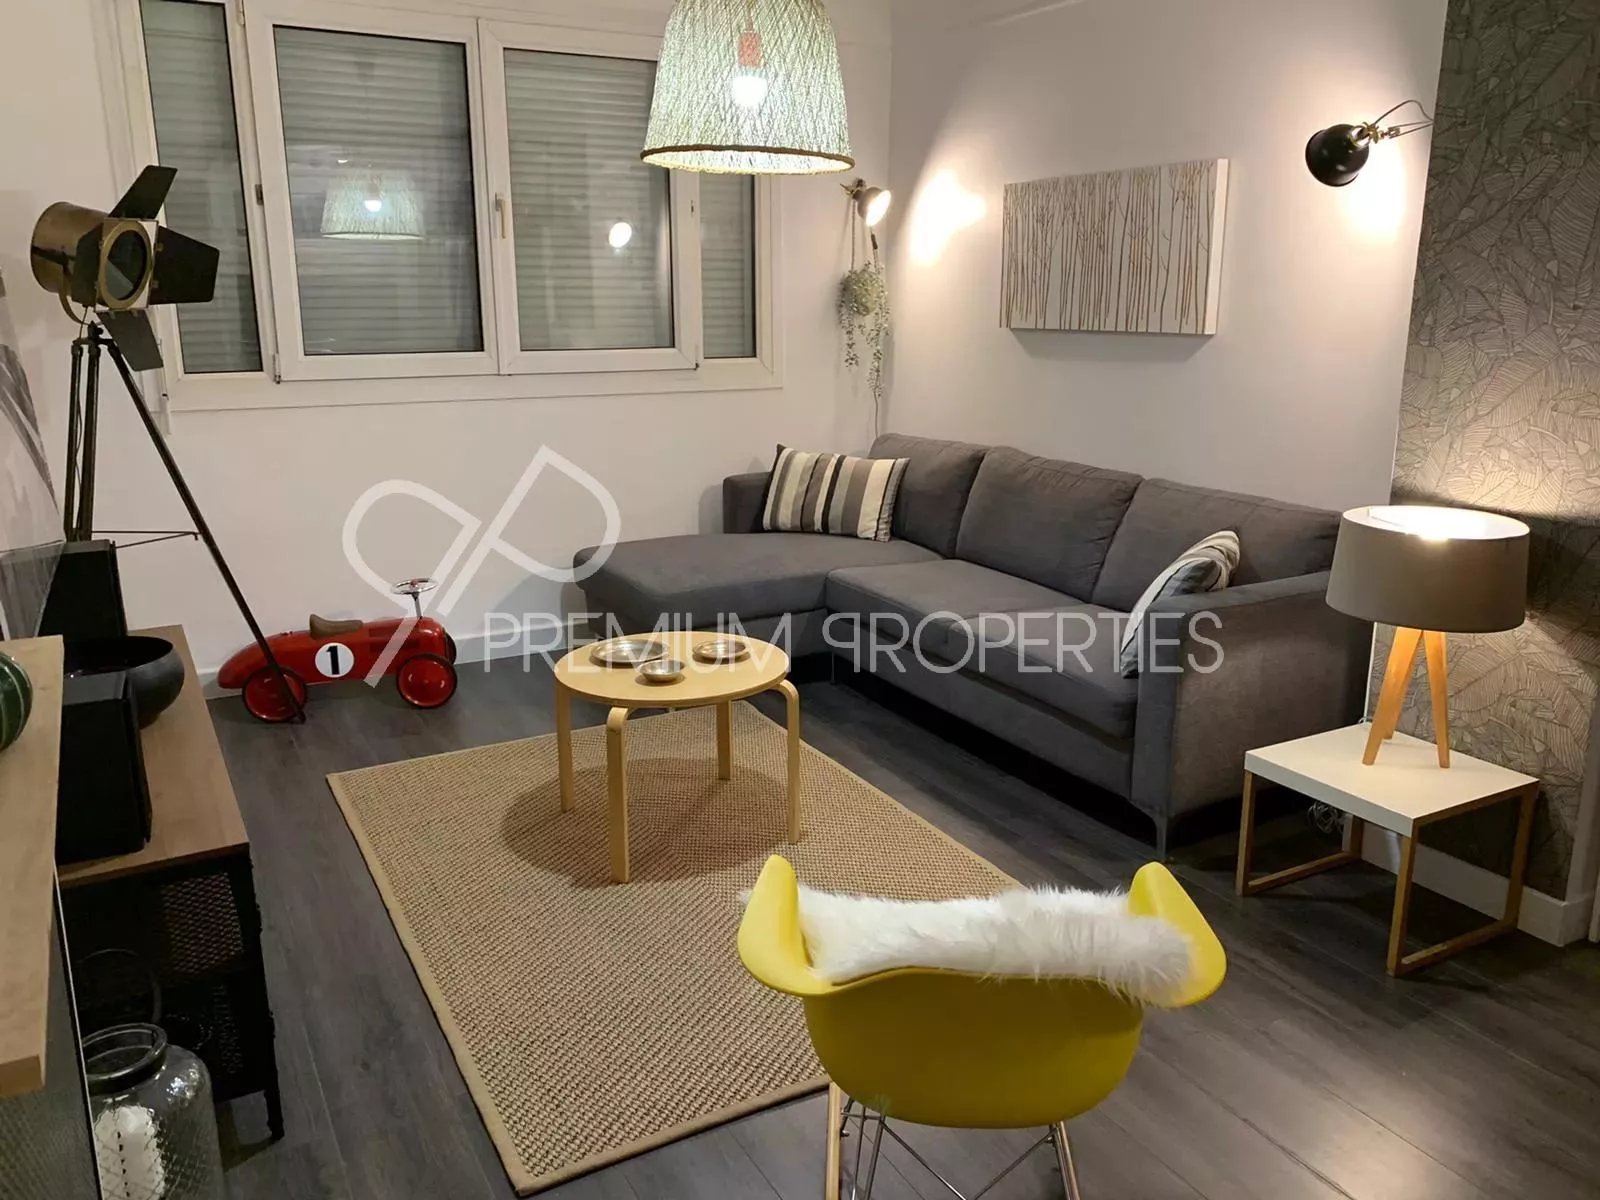 Petit Juas - Immaculate 1 bed-appartment